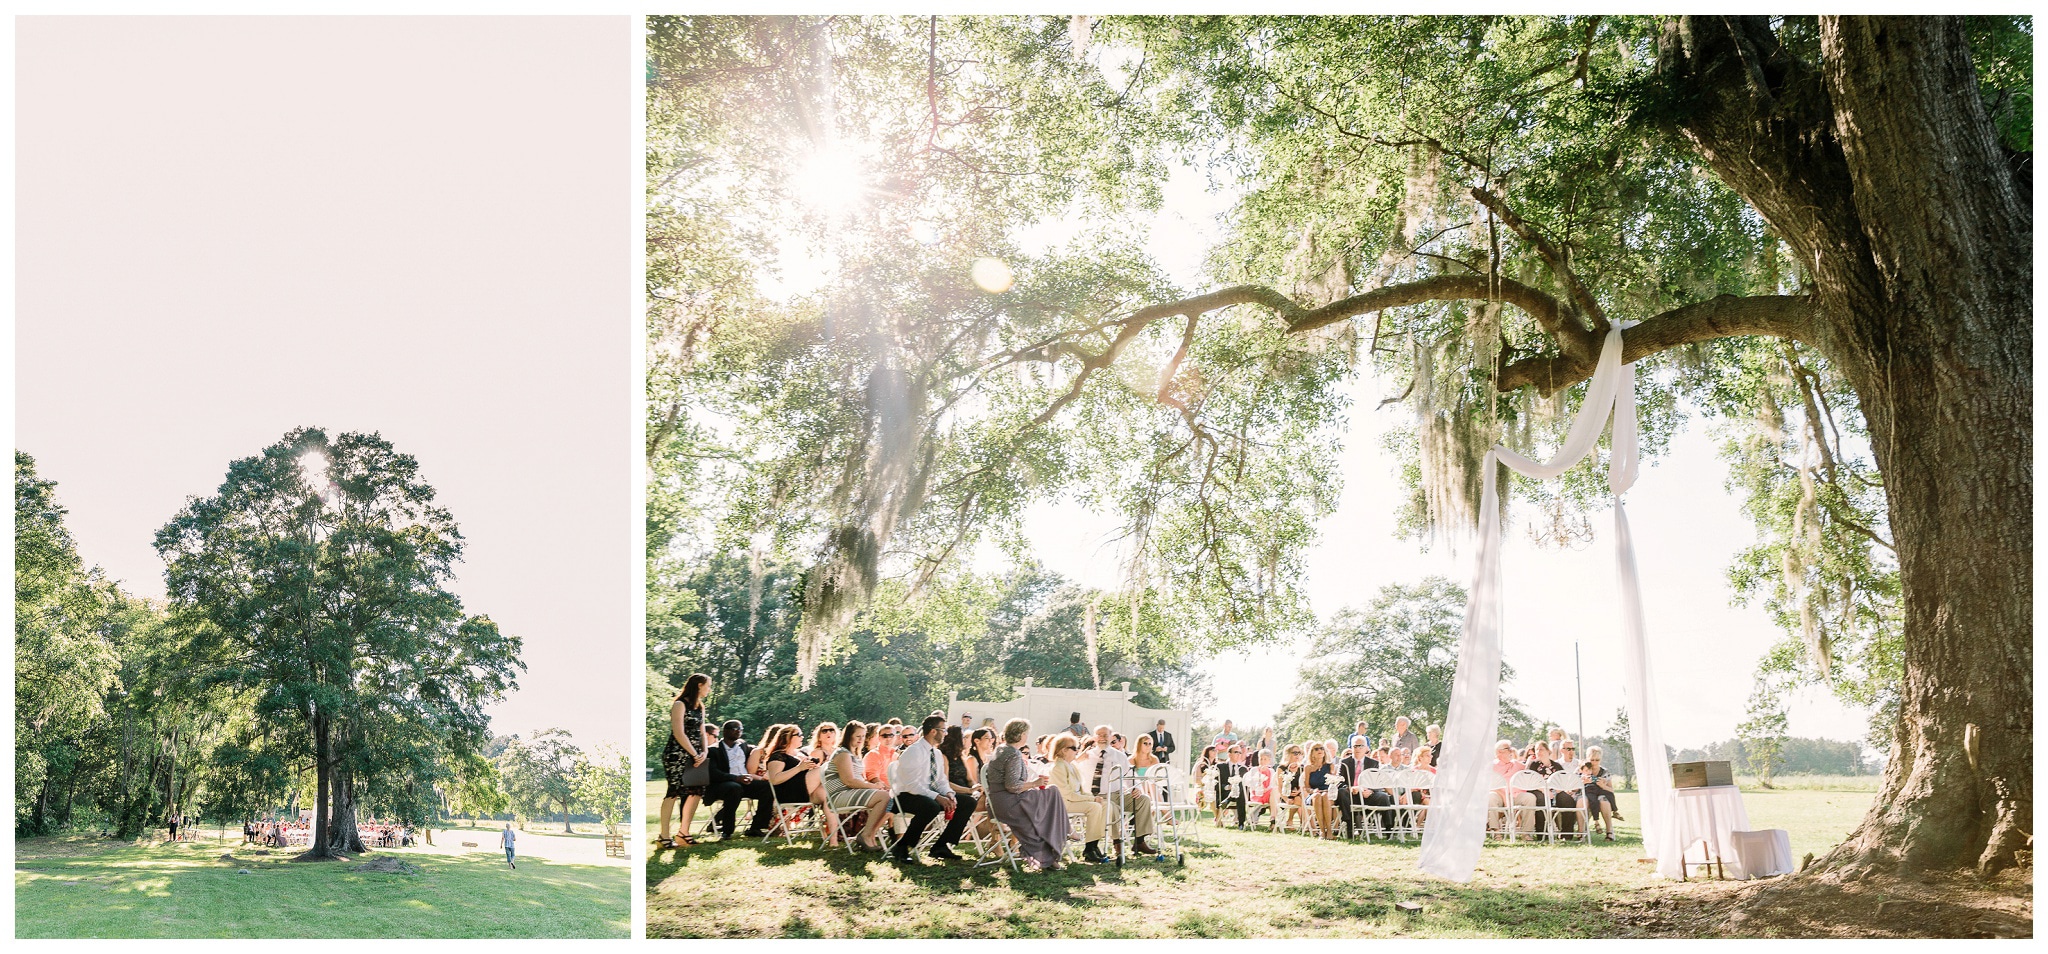 Giant oak tree as a centerpiece of the ceremony site 